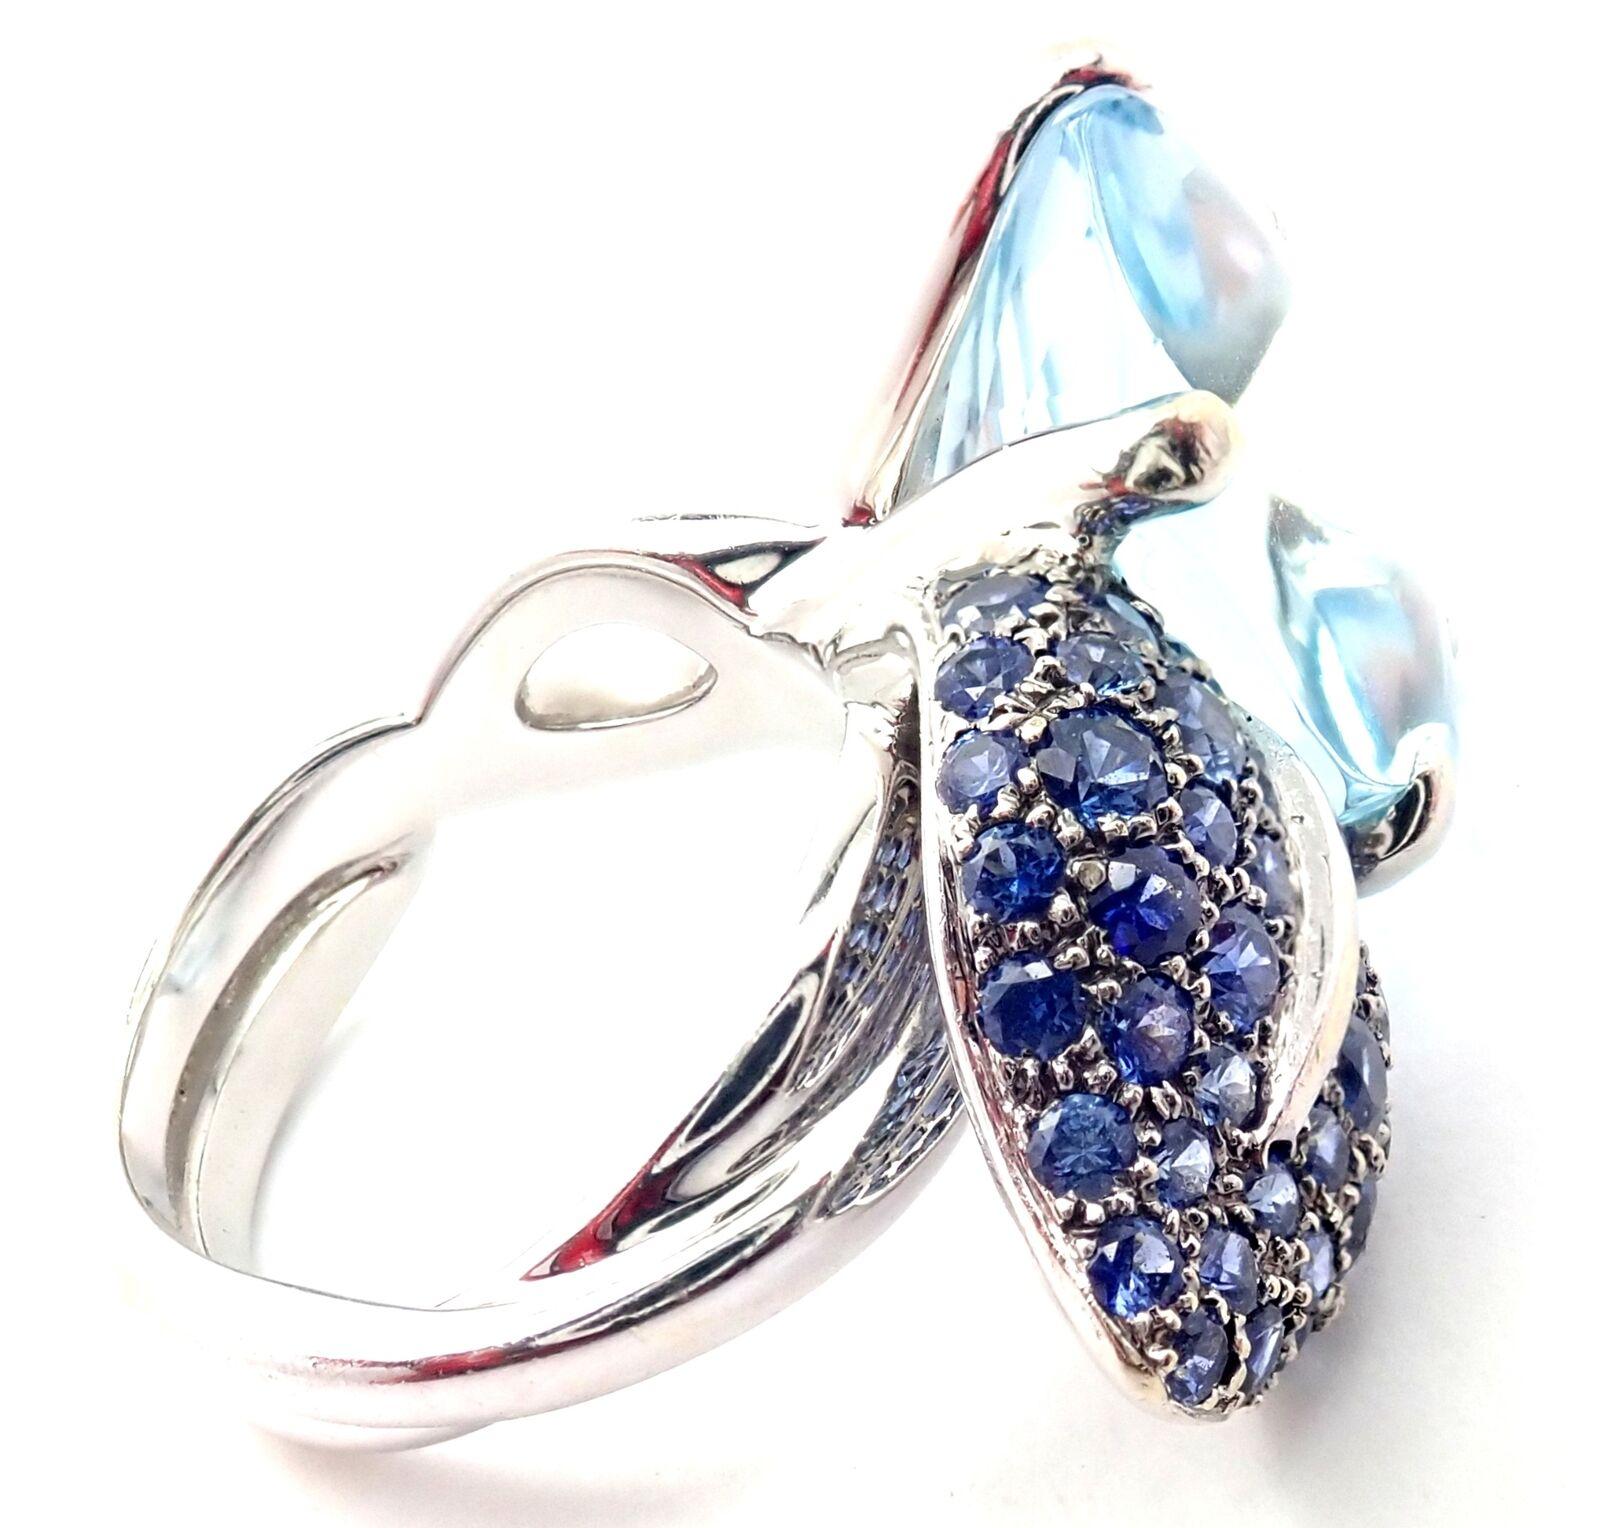 Chanel 18k White Gold Aquamarine & Blue Sapphire Ring, from the 